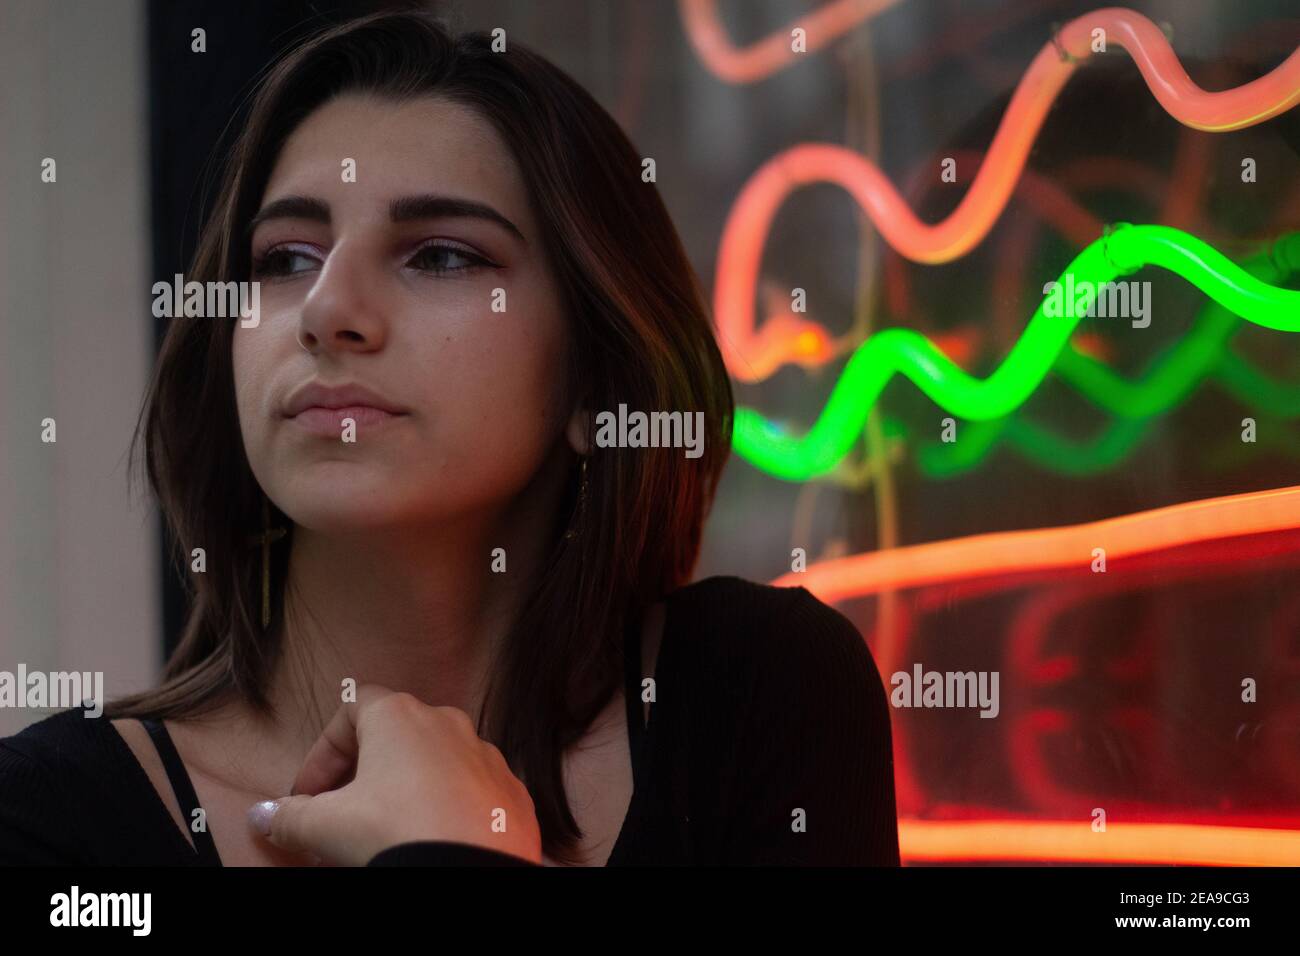 Closeup portrait of a young beautiful woman in front of a burger joint Stock Photo